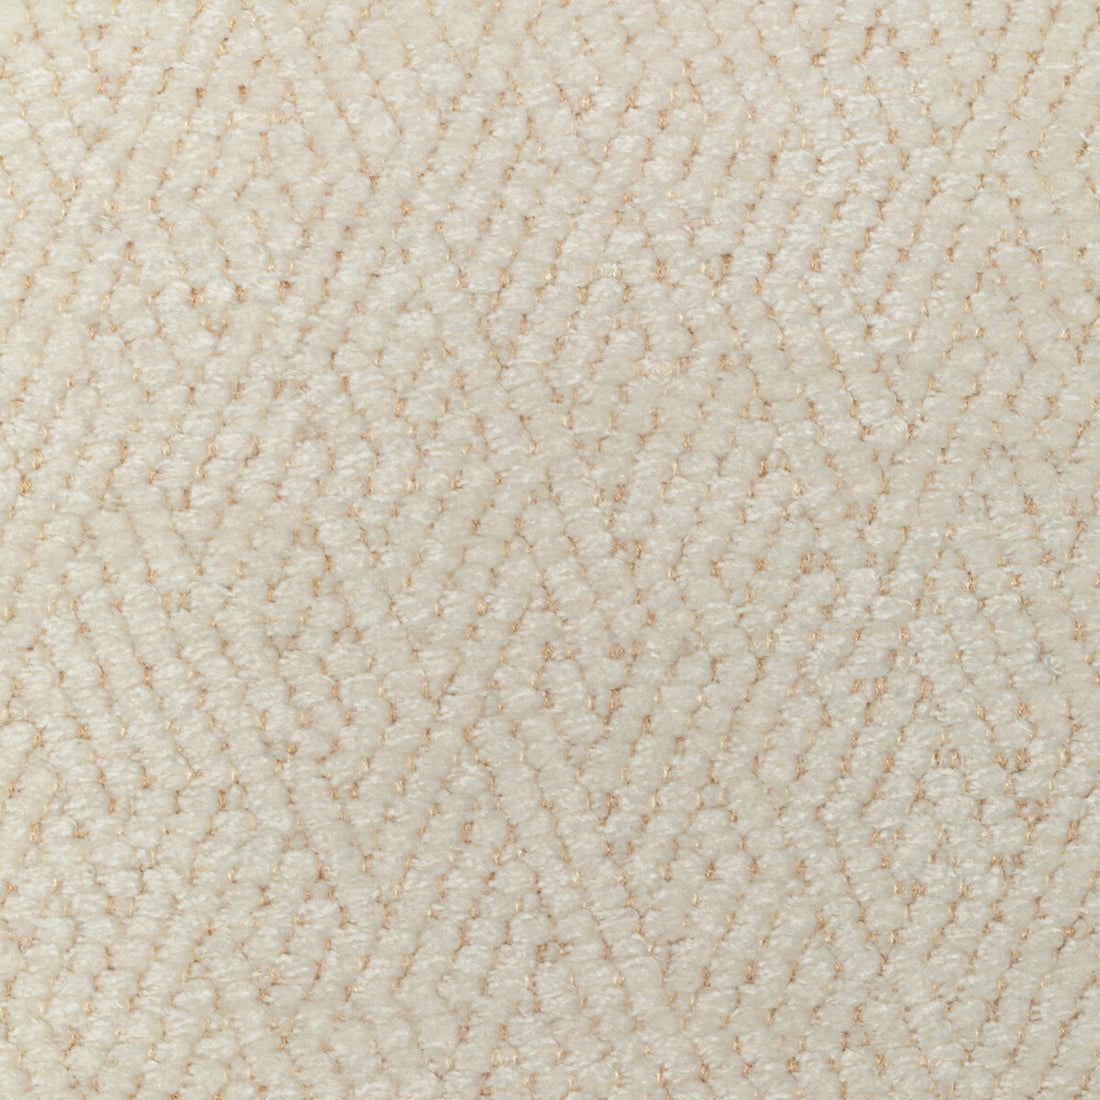 Alonso Weave fabric in pearl color - pattern 2021103.1.0 - by Lee Jofa in the Triana Weaves collection